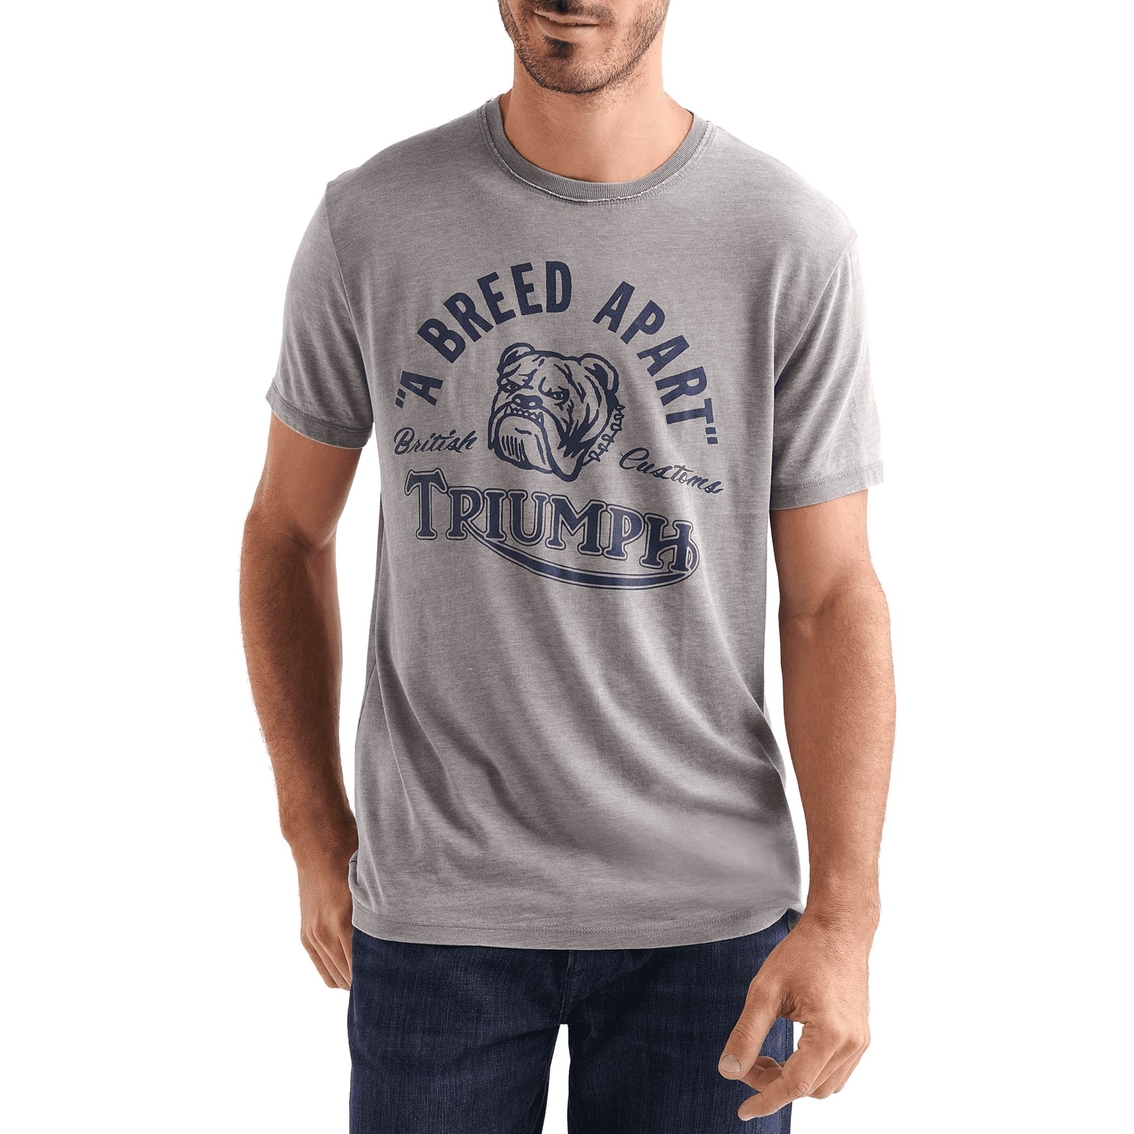 Lucky Brand Triumph Breed Apart Tee, Shirts, Clothing & Accessories